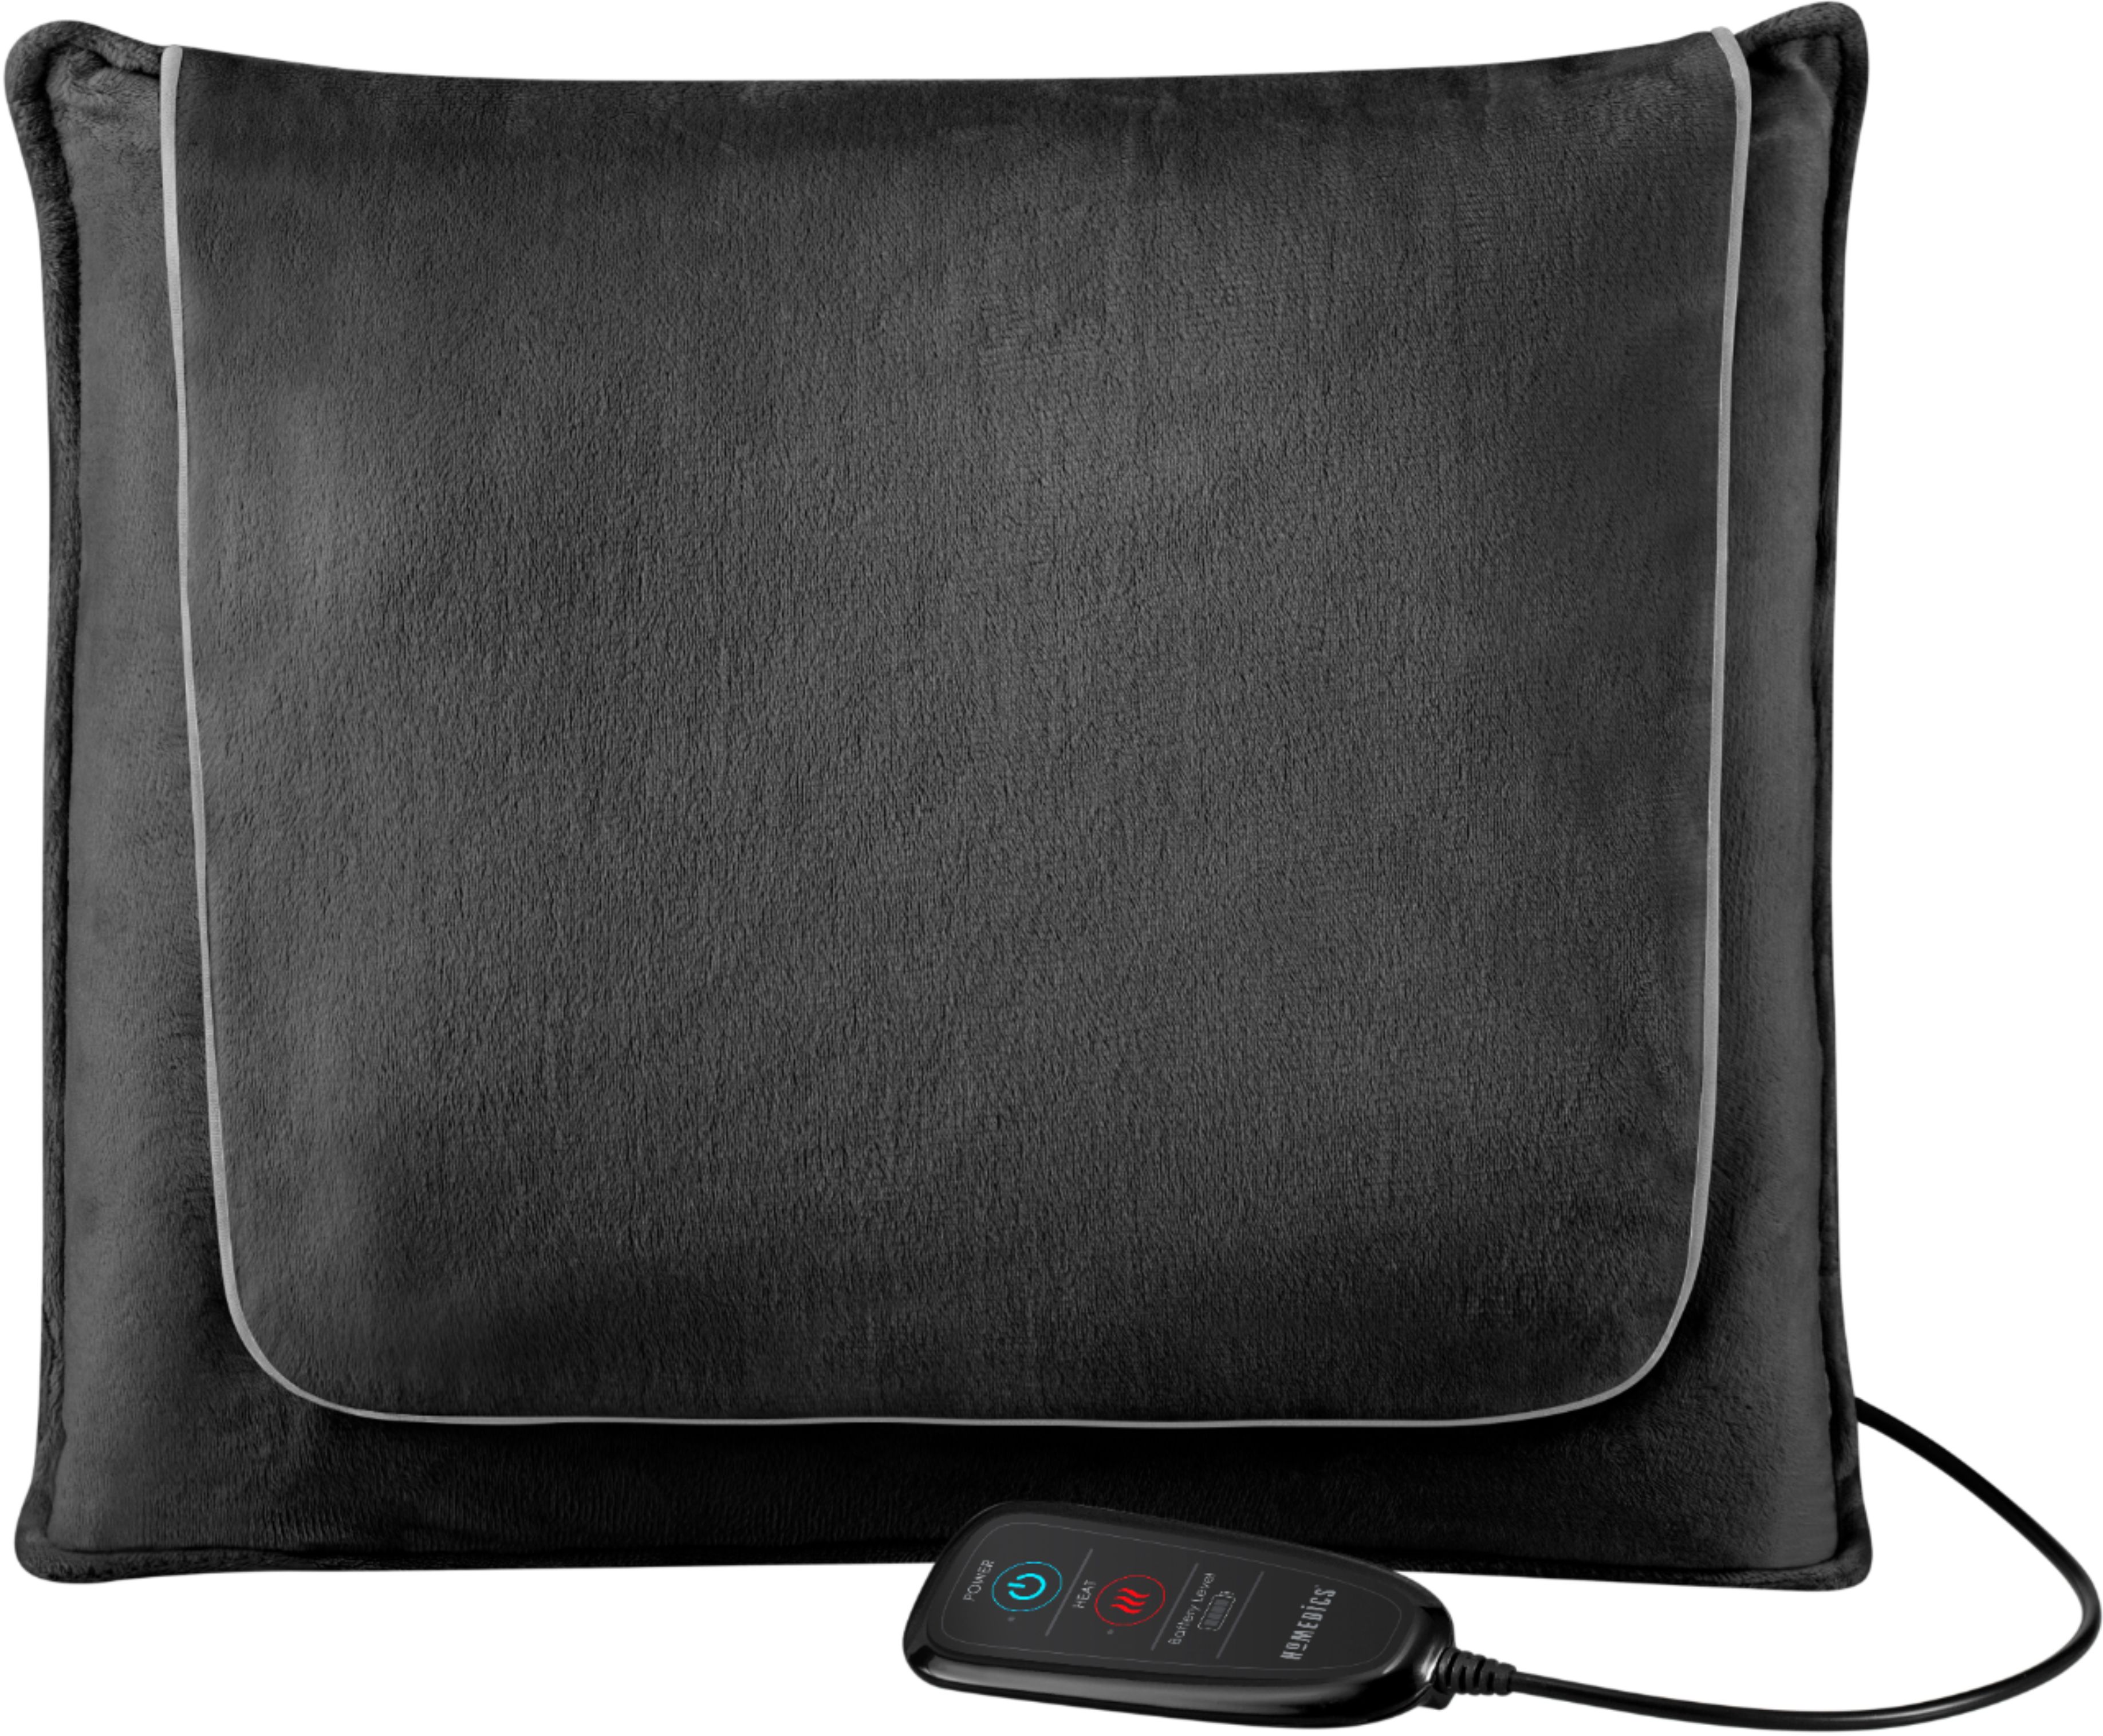 Shiatsu Massage Pillow with Heat and Car/Home Chargers - DailySteals